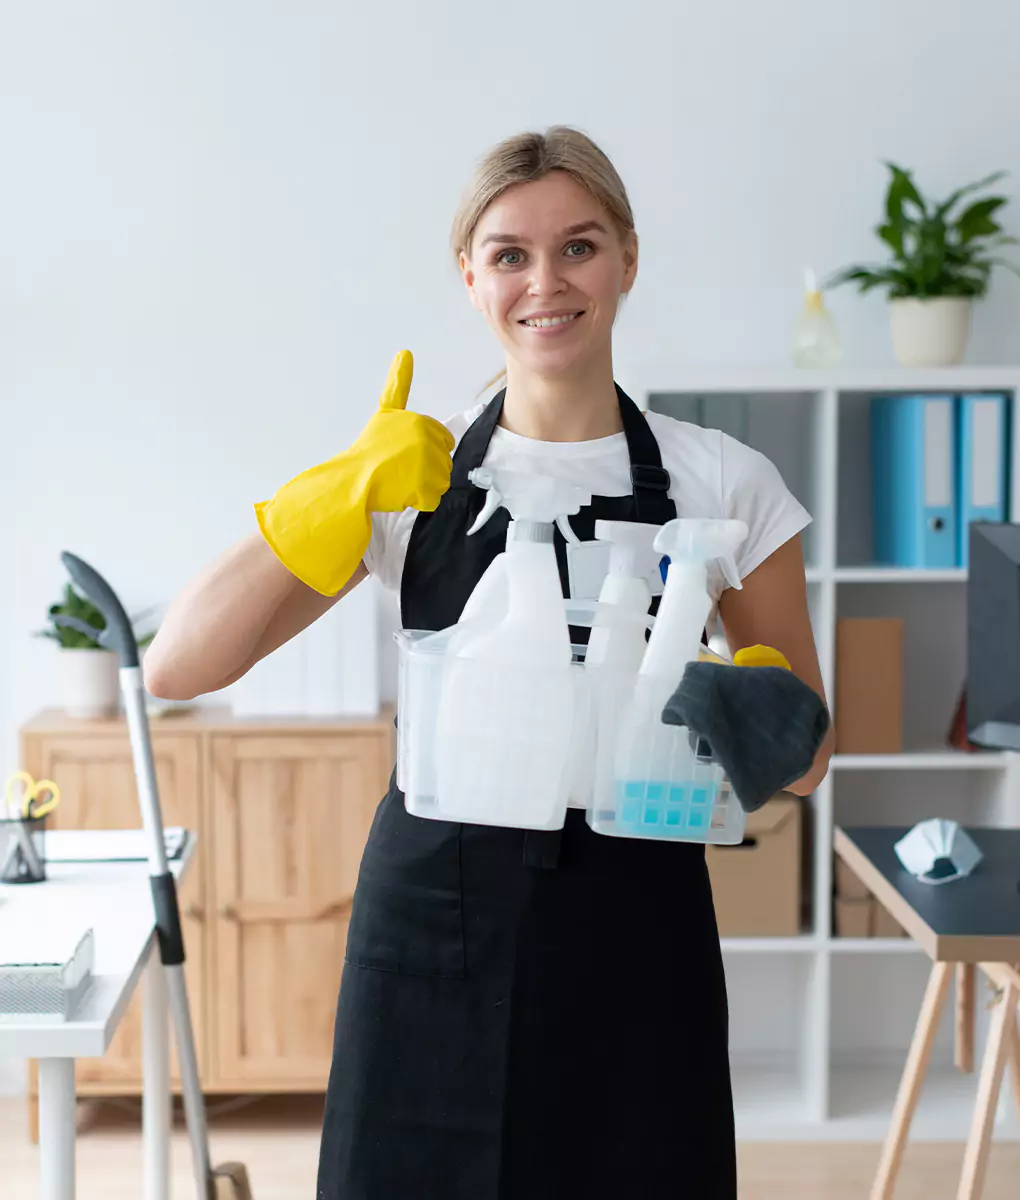 make-your-business-sparkle-with-our-specialty-cleaning-services-6532ae0516137